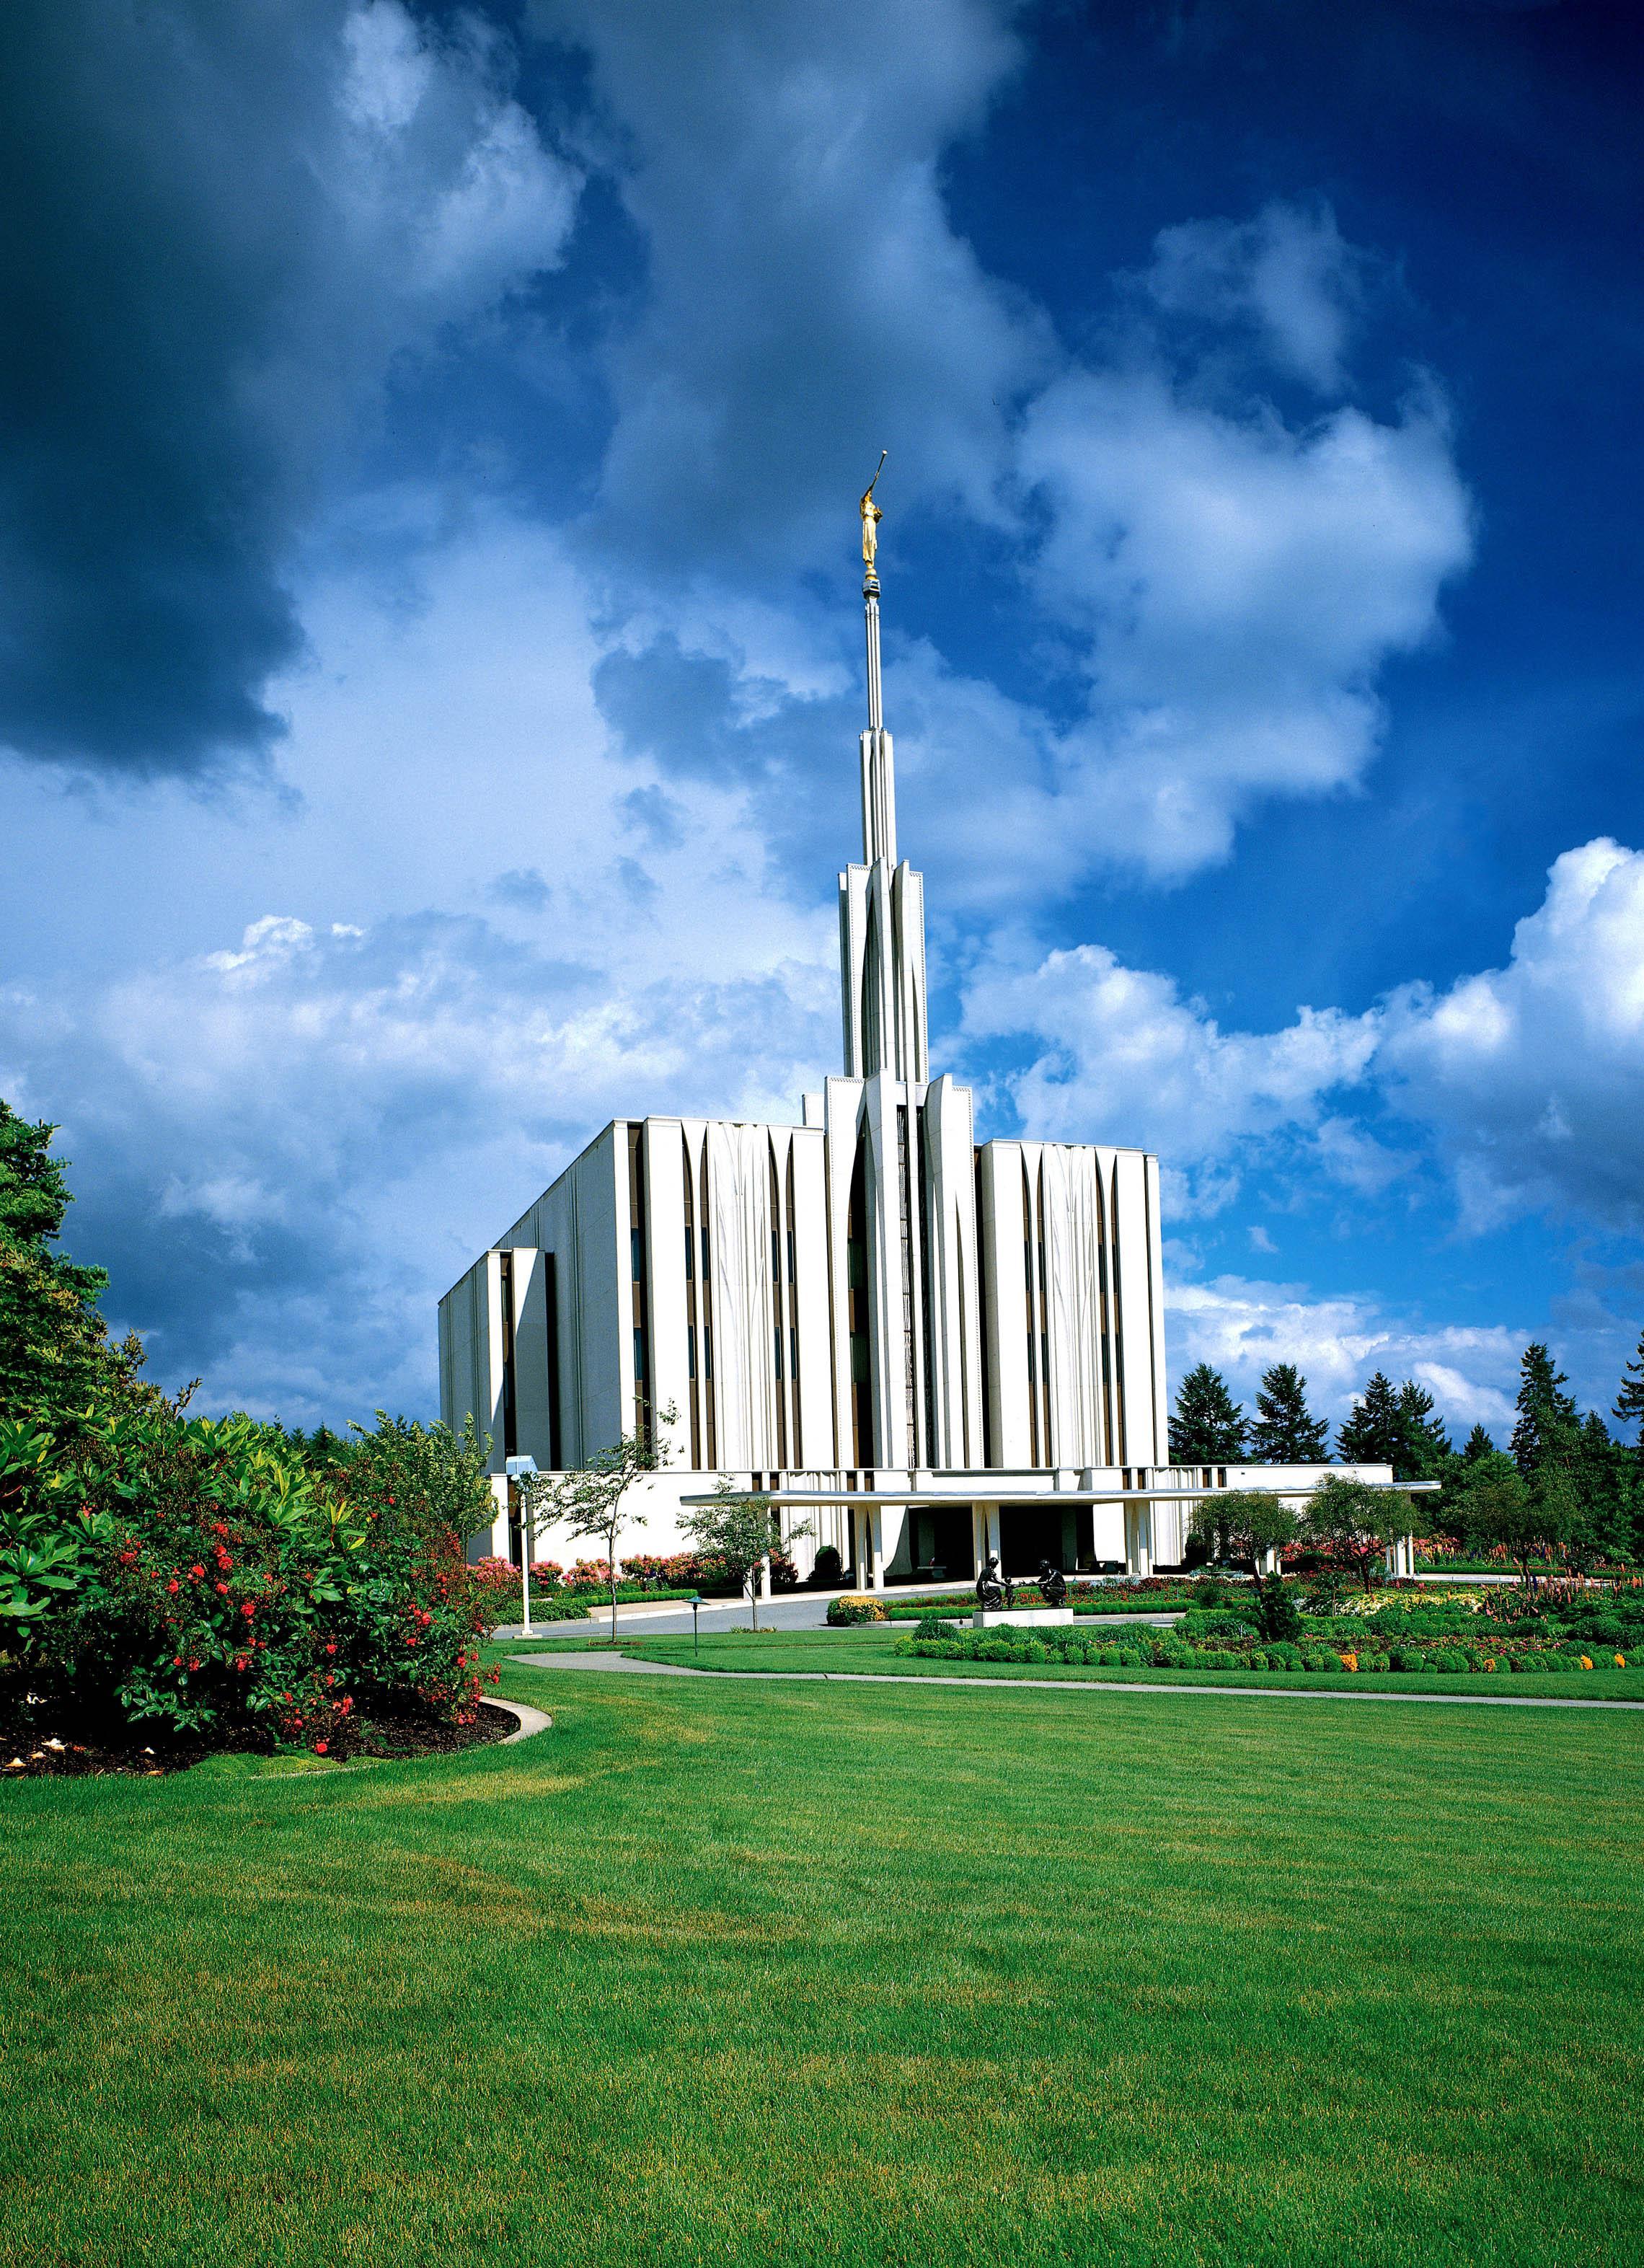 The Seattle Washington Temple, a white building with a steeple topped by a golden statue of an angel blowing a trumpet.